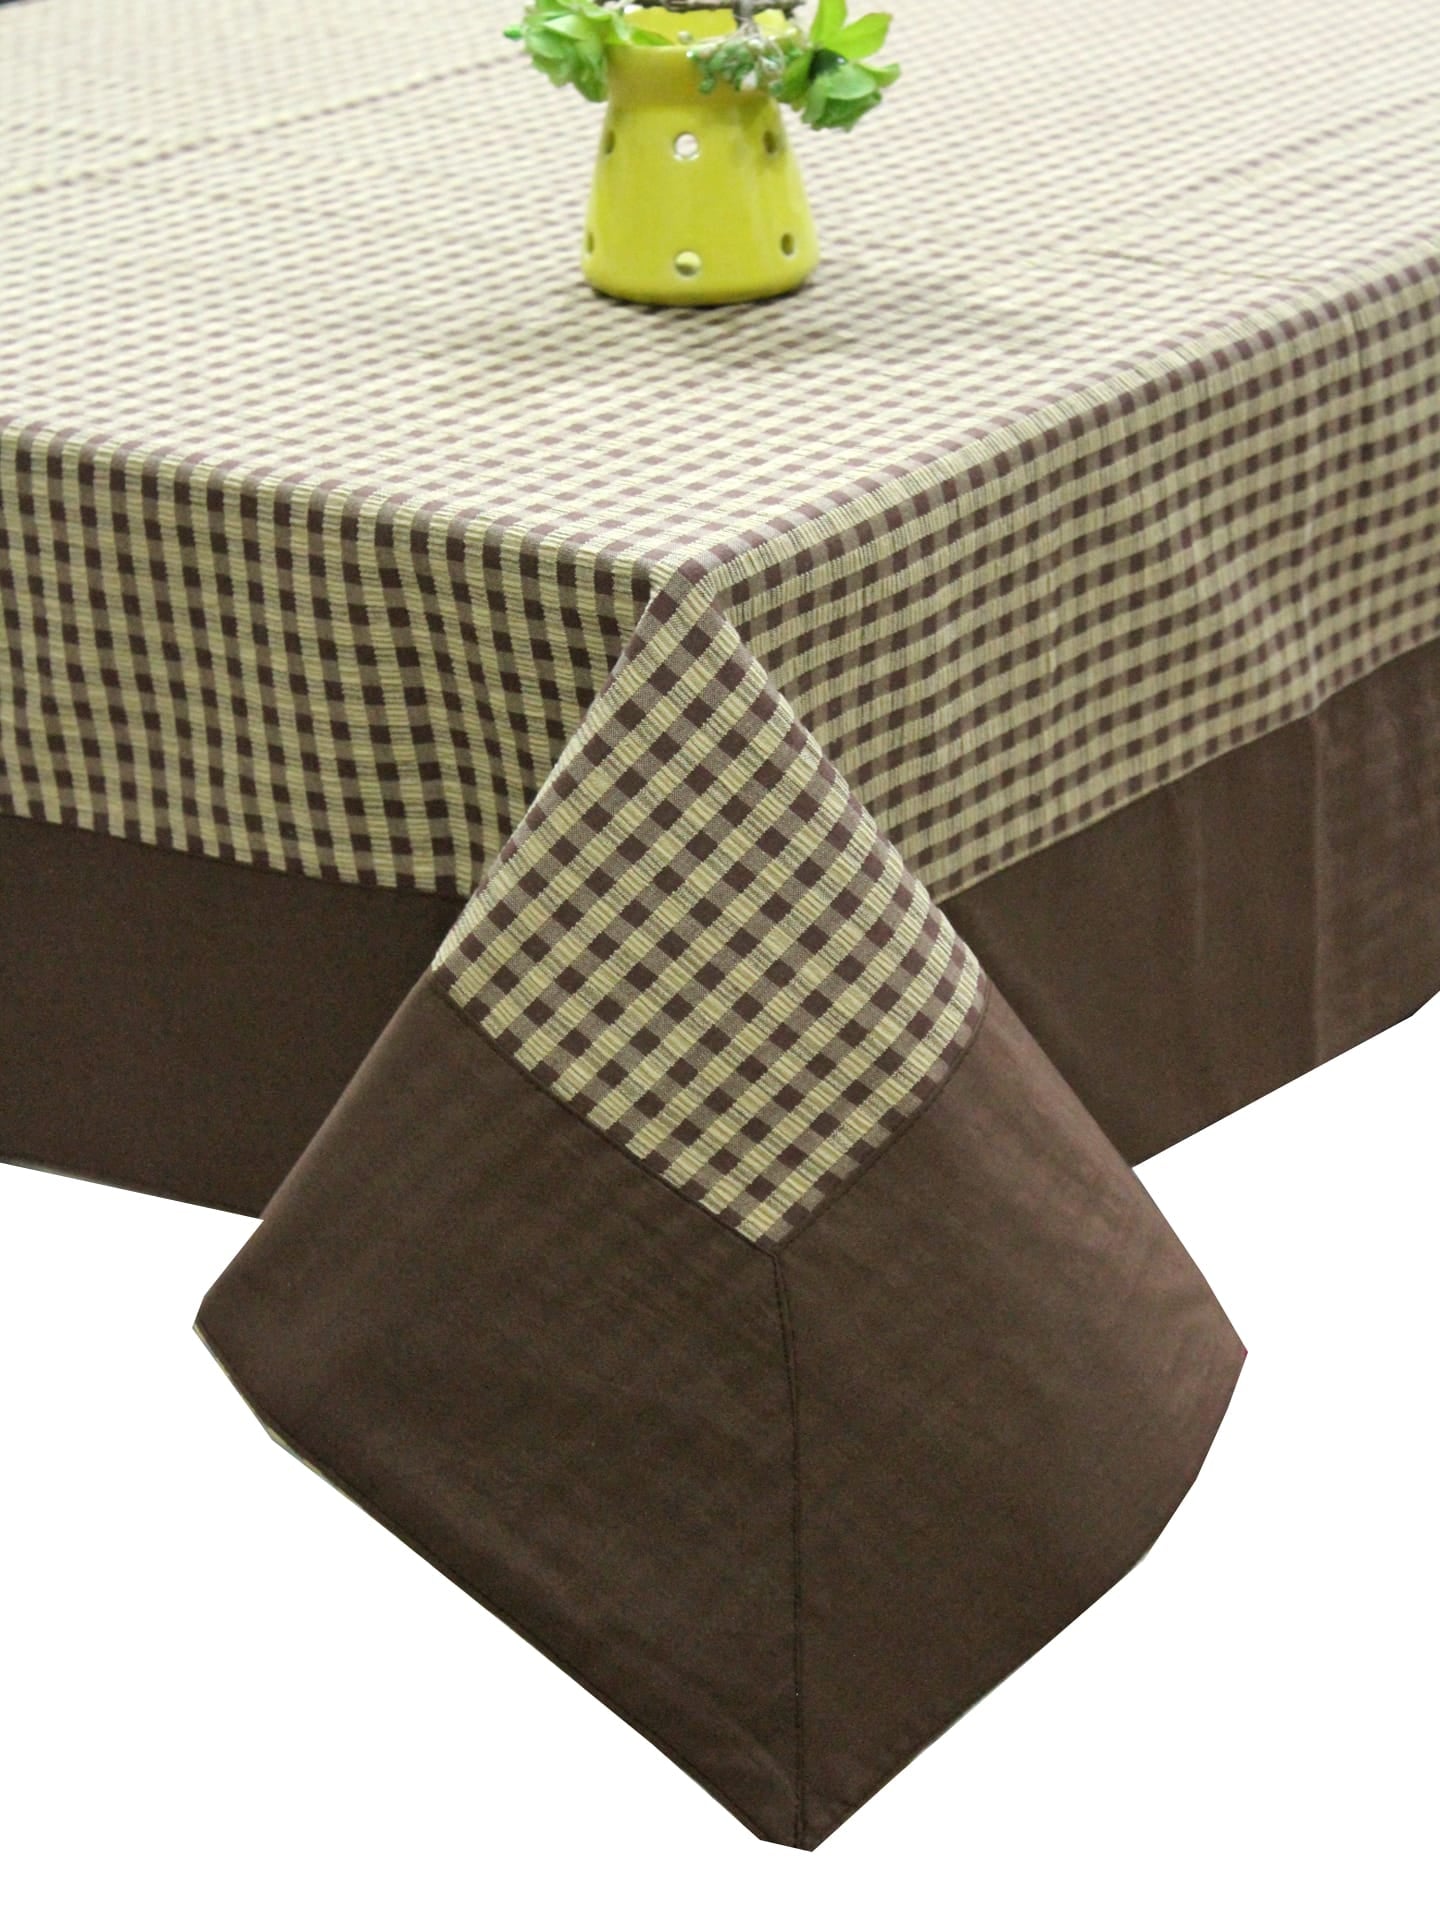 ALPHA Woven Cotton Check 1 Pc Table Cover - Brown & Yellow